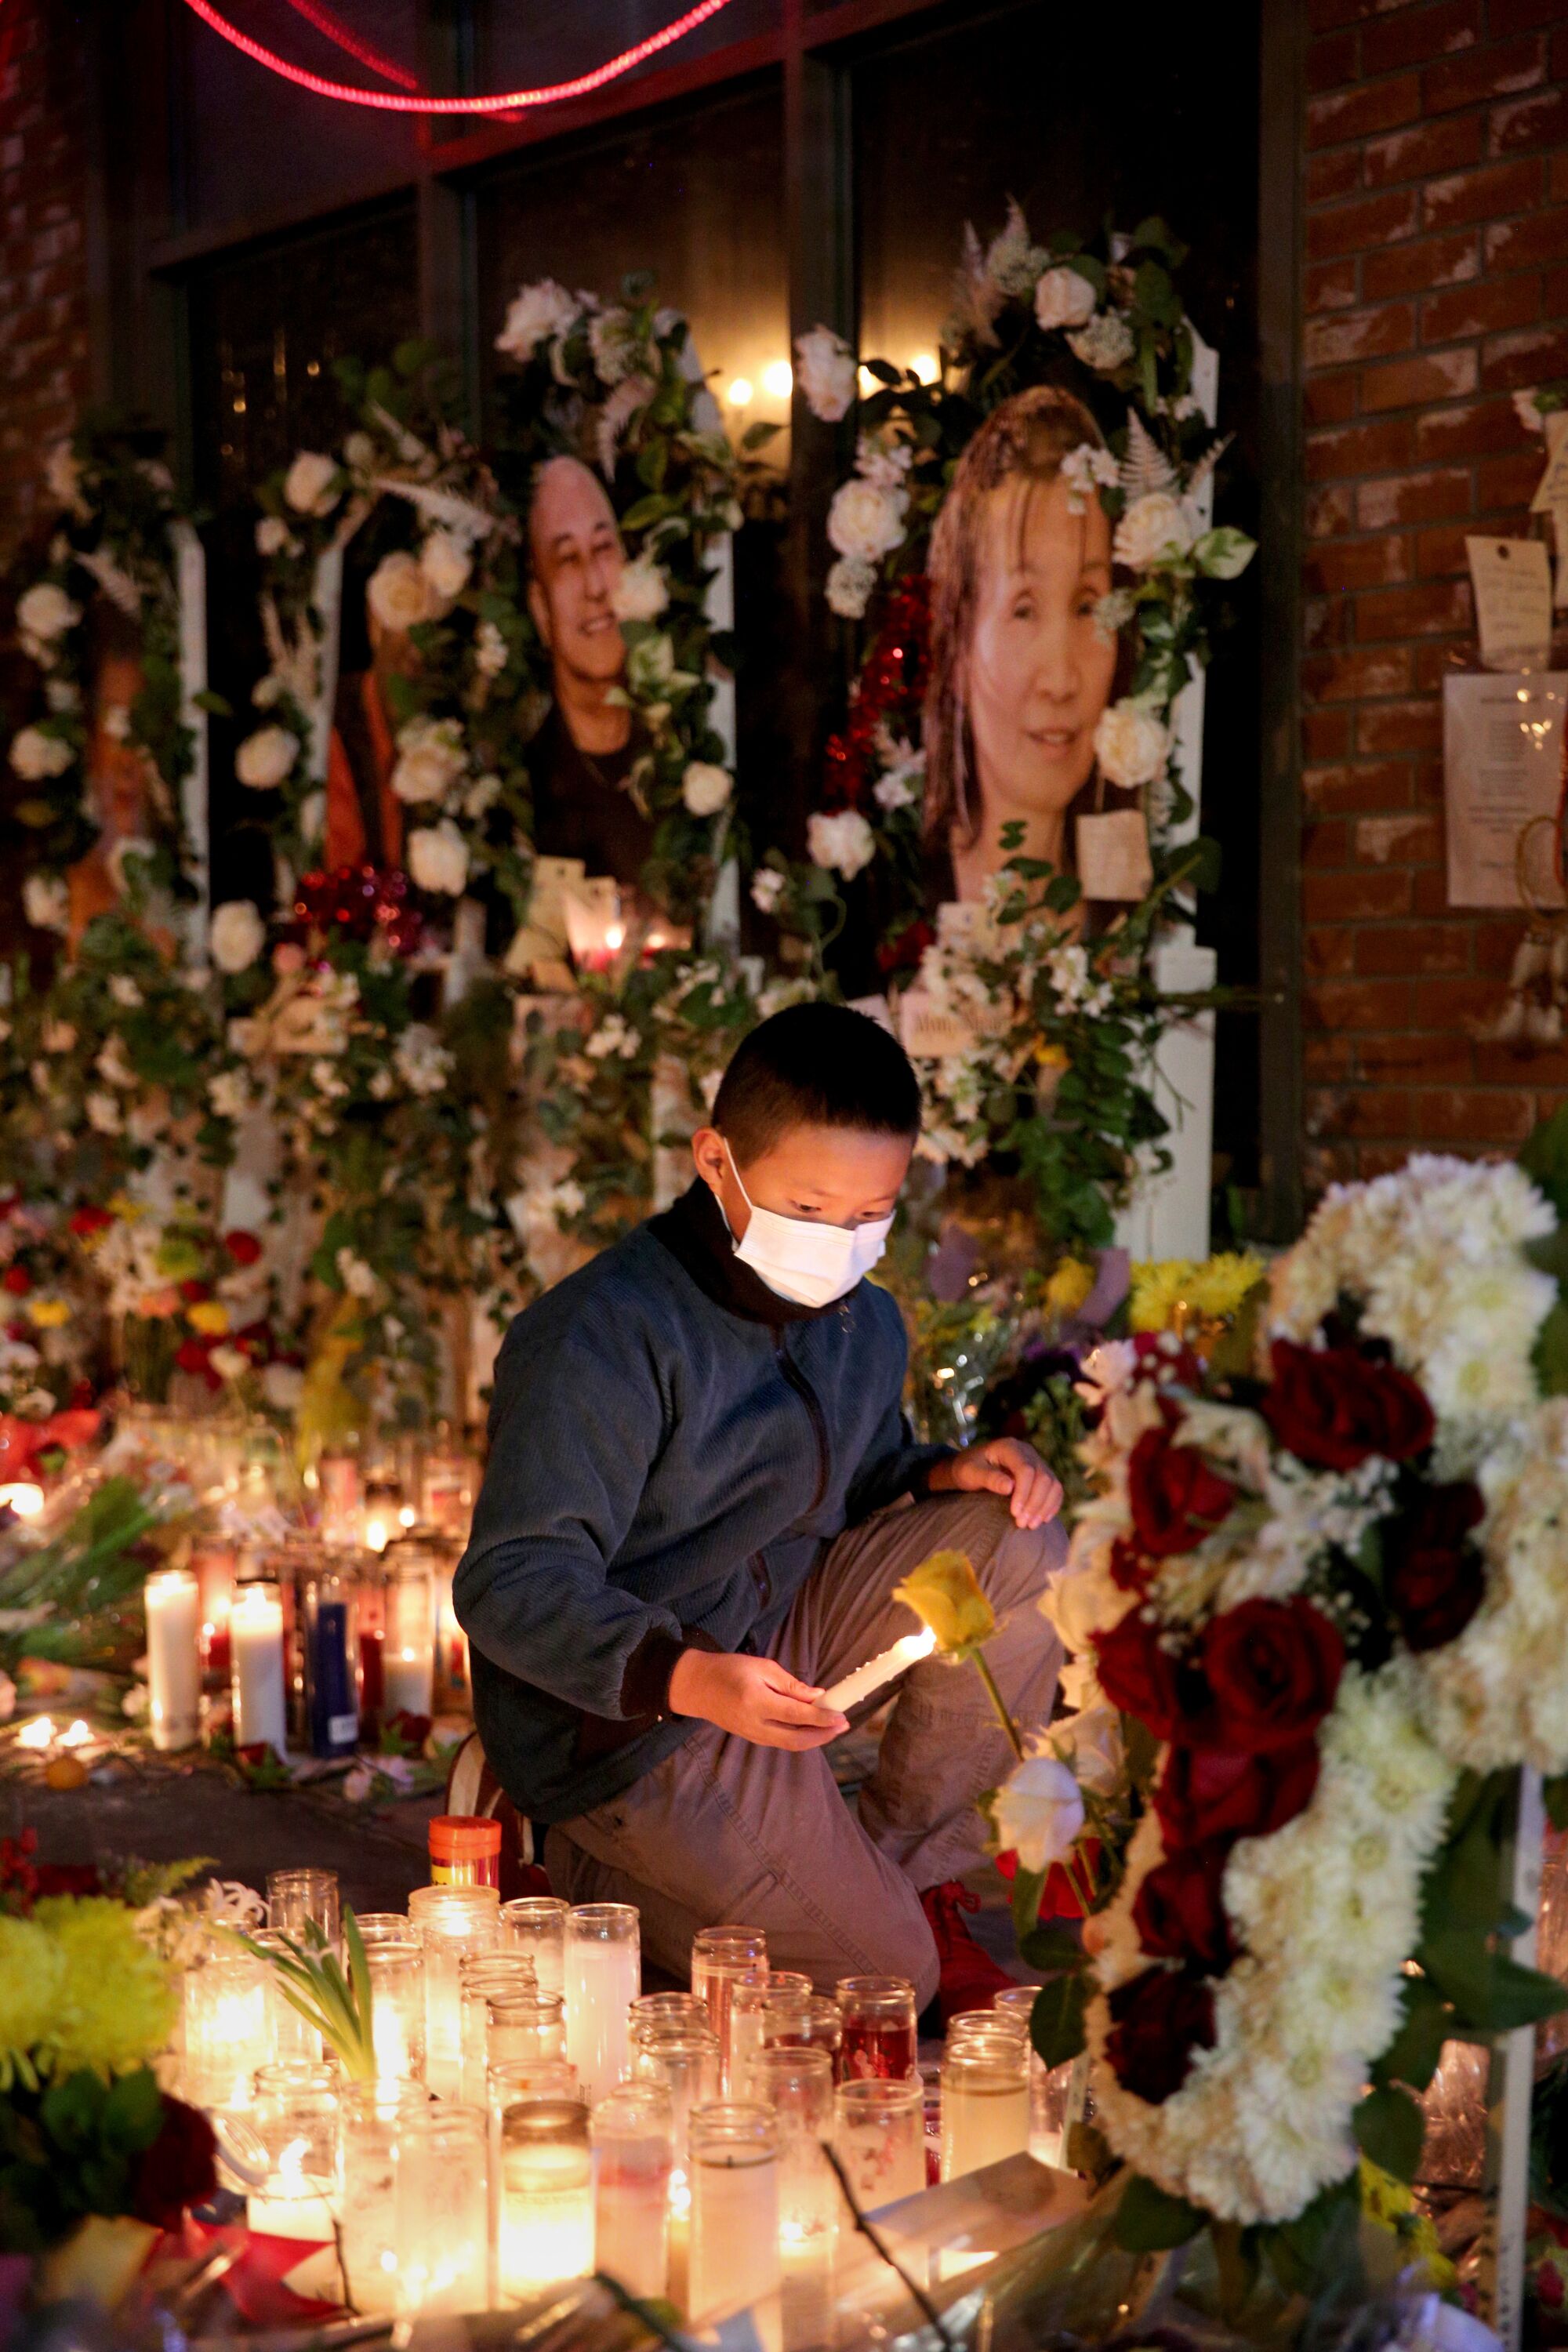 A boy lights candles at a memorial site , surrounded by lit candles and flowers, with portraits of victims above him.